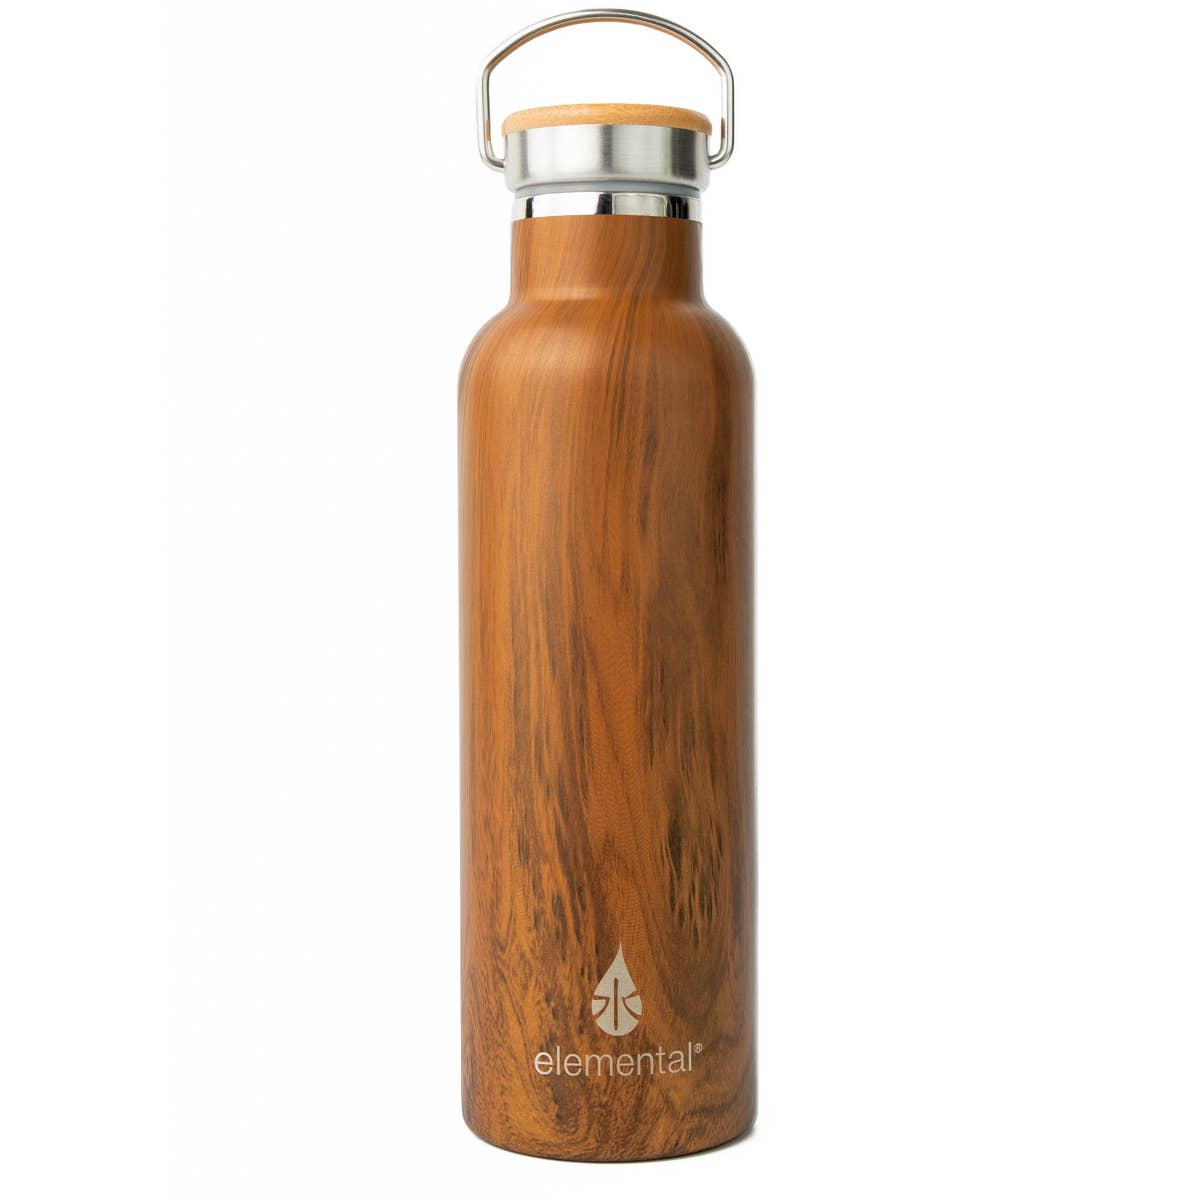 Elemental | 25oz Elemental Stainless Classic Water Bottle - Teak Wood, Water Bottle, Elemental, Defiance Outdoor Gear Co.